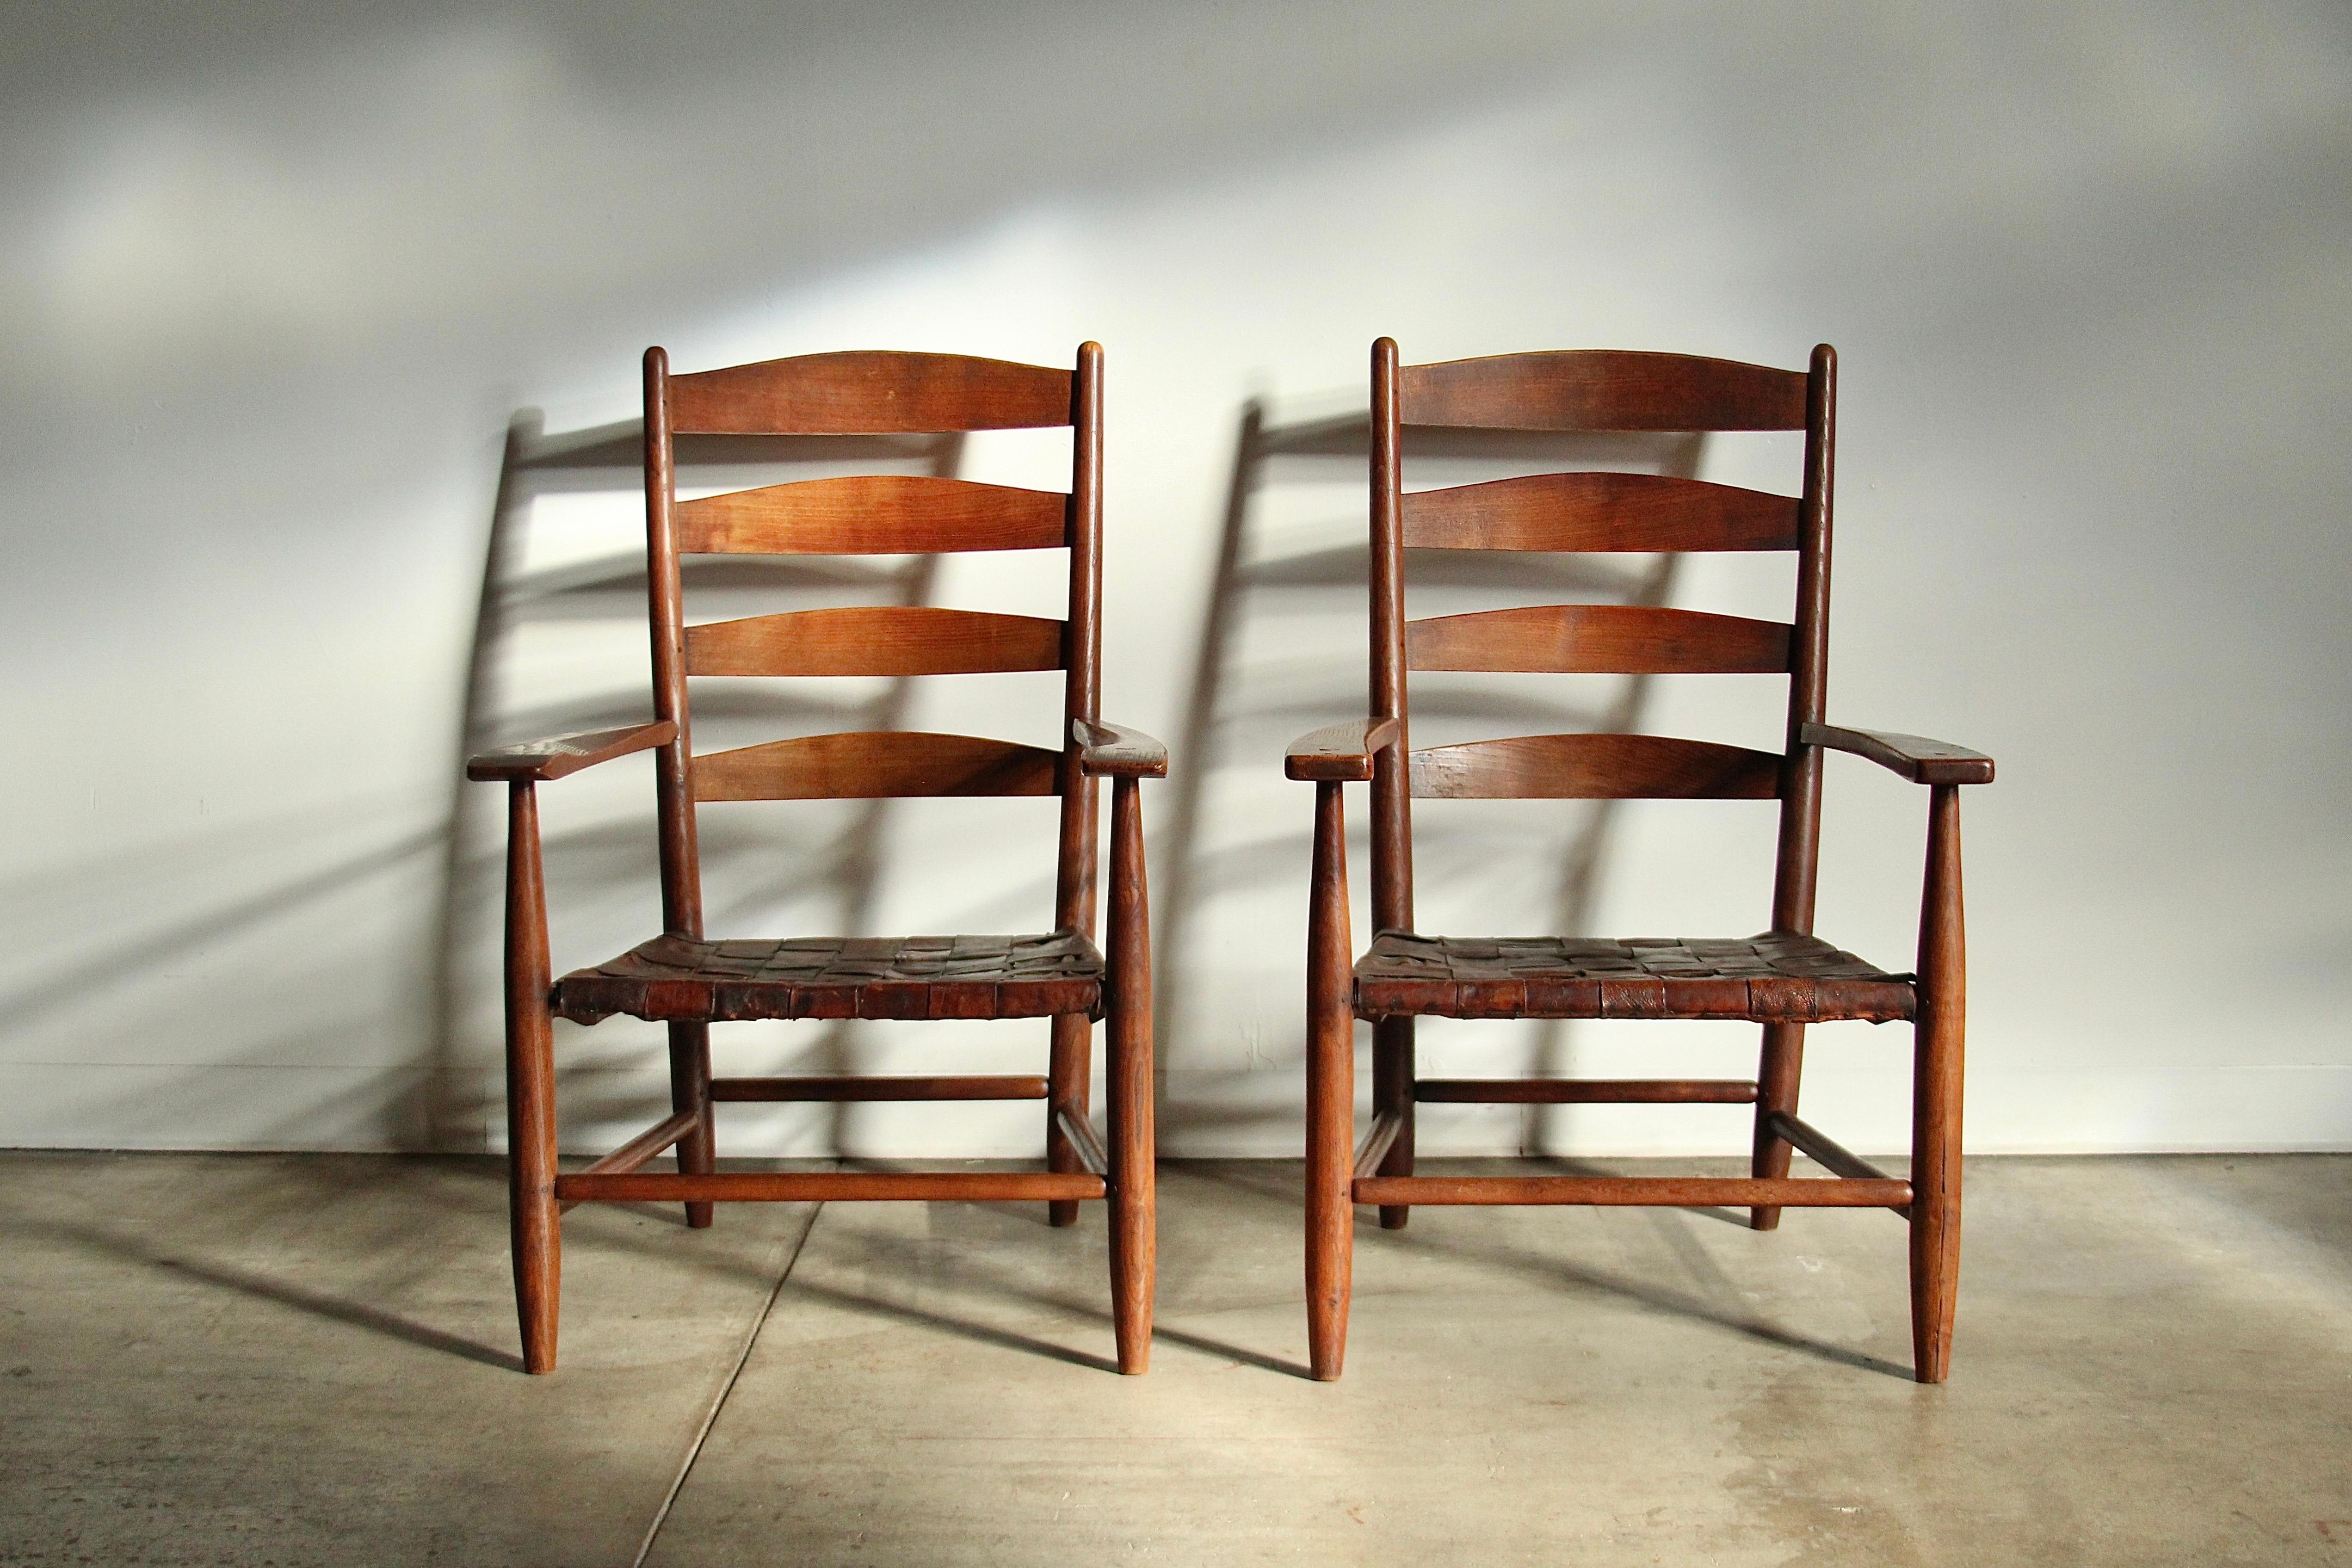 English Gordon Russell Hand Built Ladder Back Oak & Woven Leather Lounge Chairs, 1904 For Sale